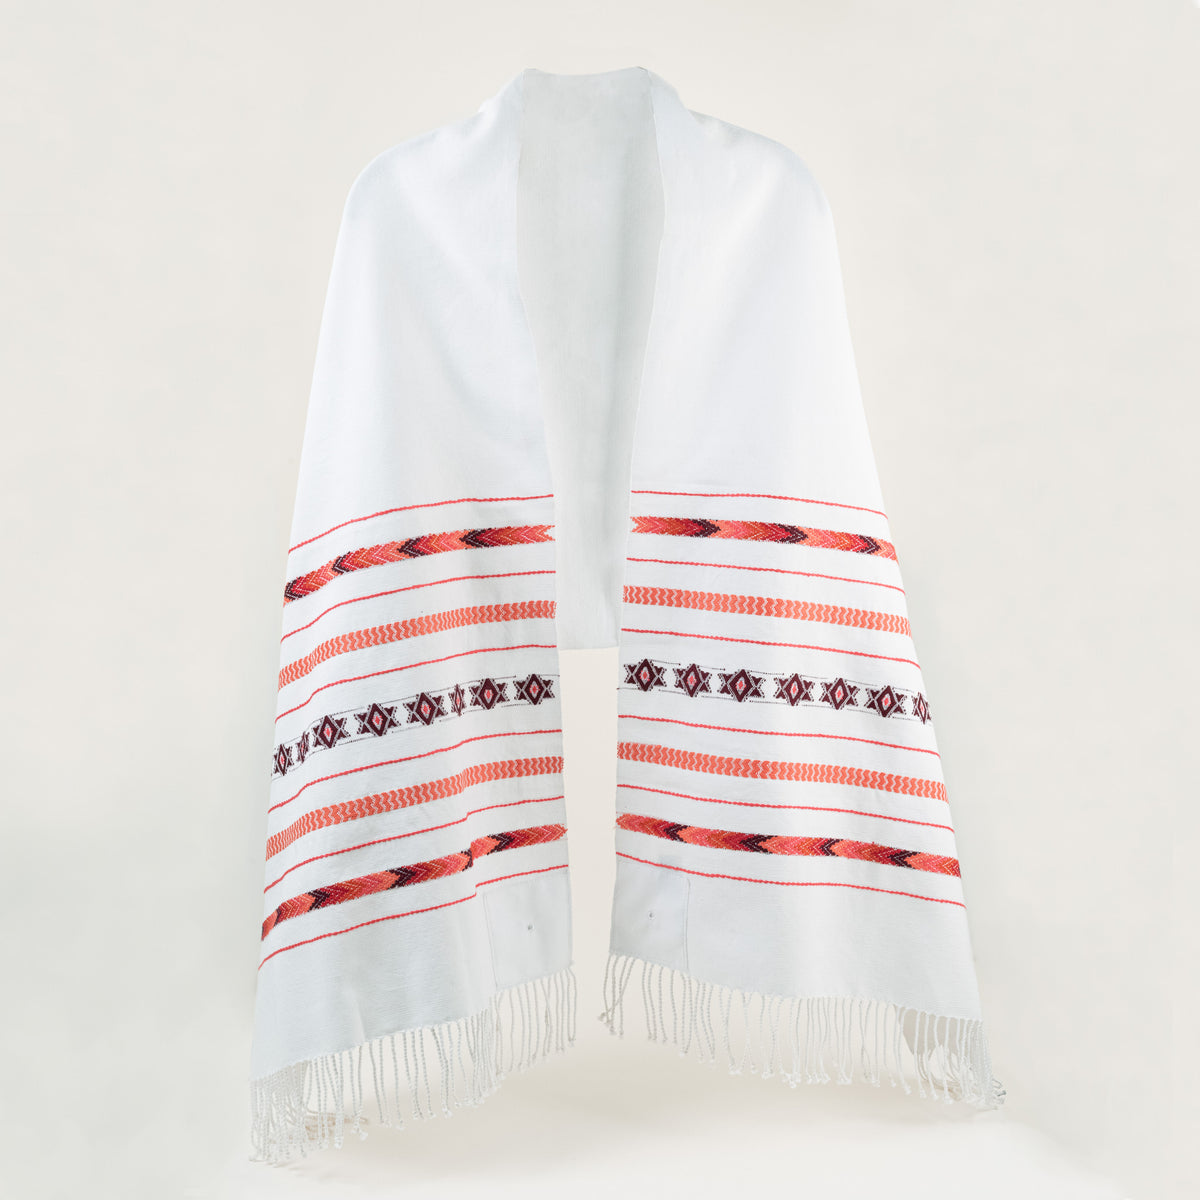 Handwoven tallit in white with reds